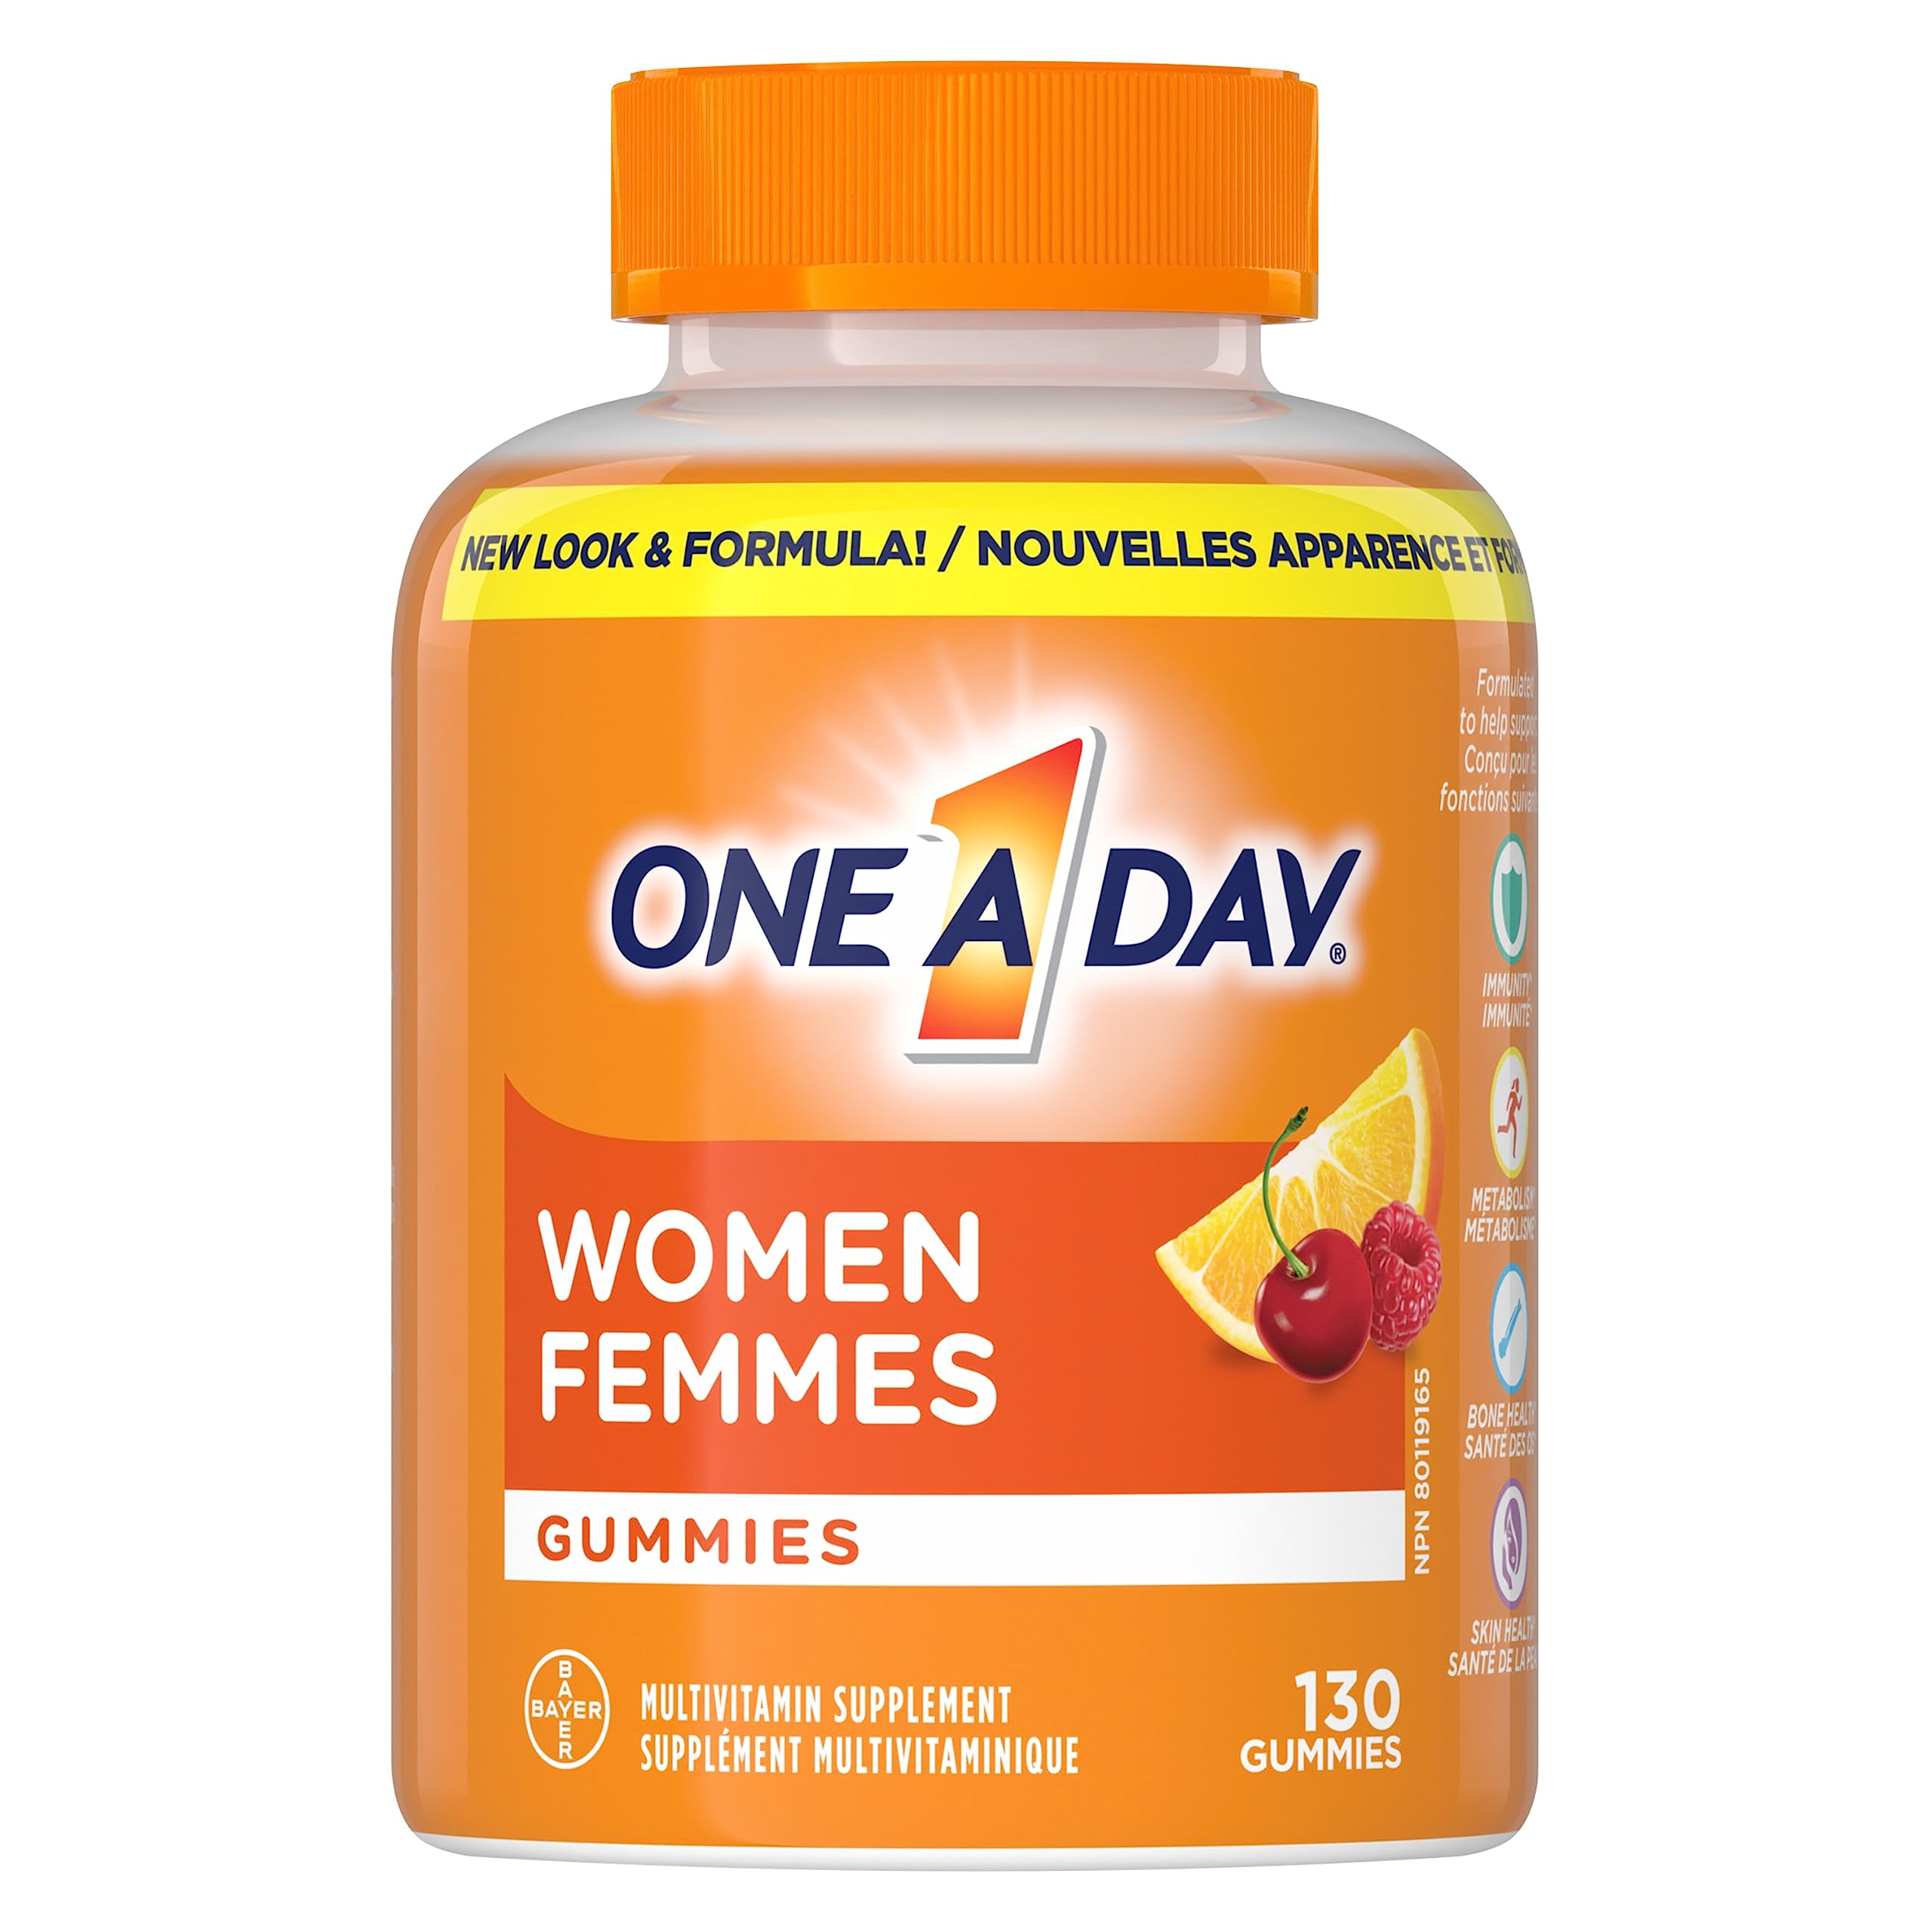 One A Day Women's Multivitamin Gummies - Daily Gummy Vitamins For Women With Vitamins A, C, D And Zinc To Support Immune Function, Biotin For Healthy Hair, Skin And Nails, And More, 130 Gummies